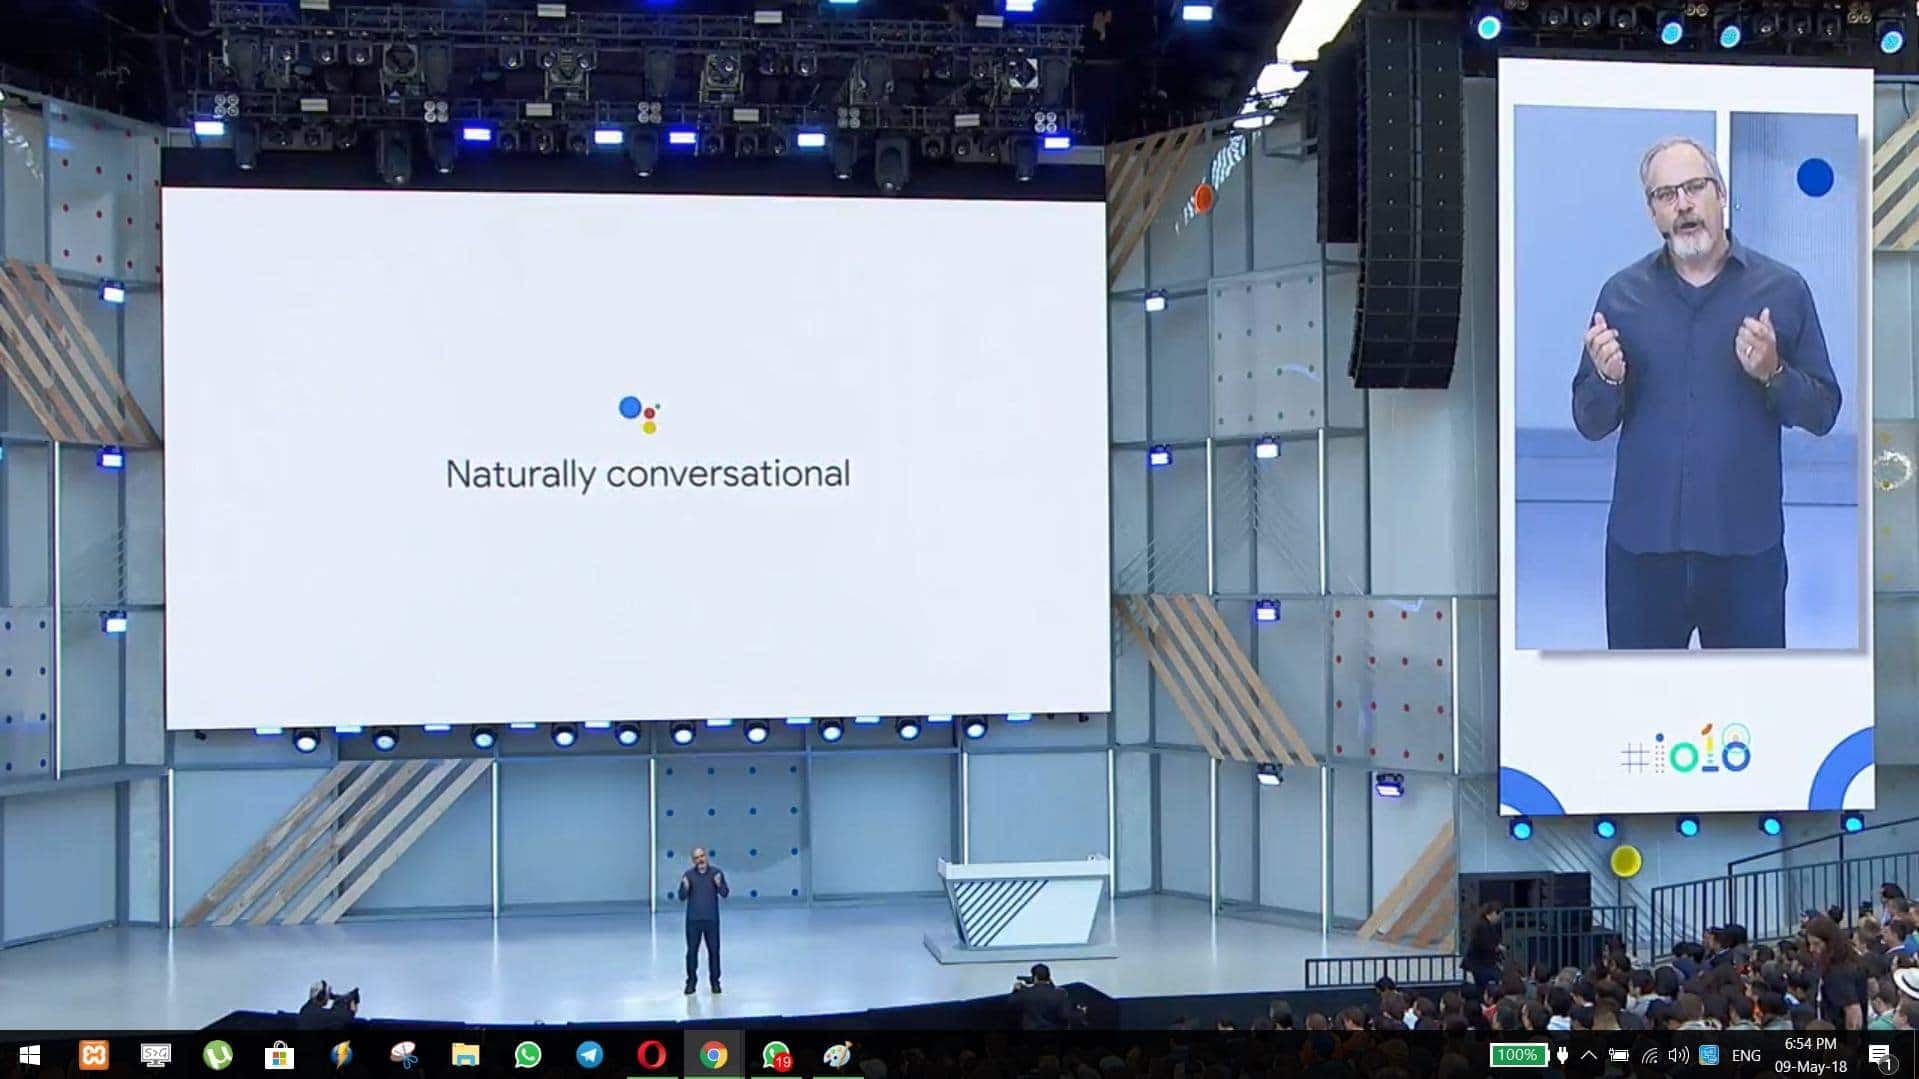 No Need To Say “Hey Google” Every time You Command Google Assistant